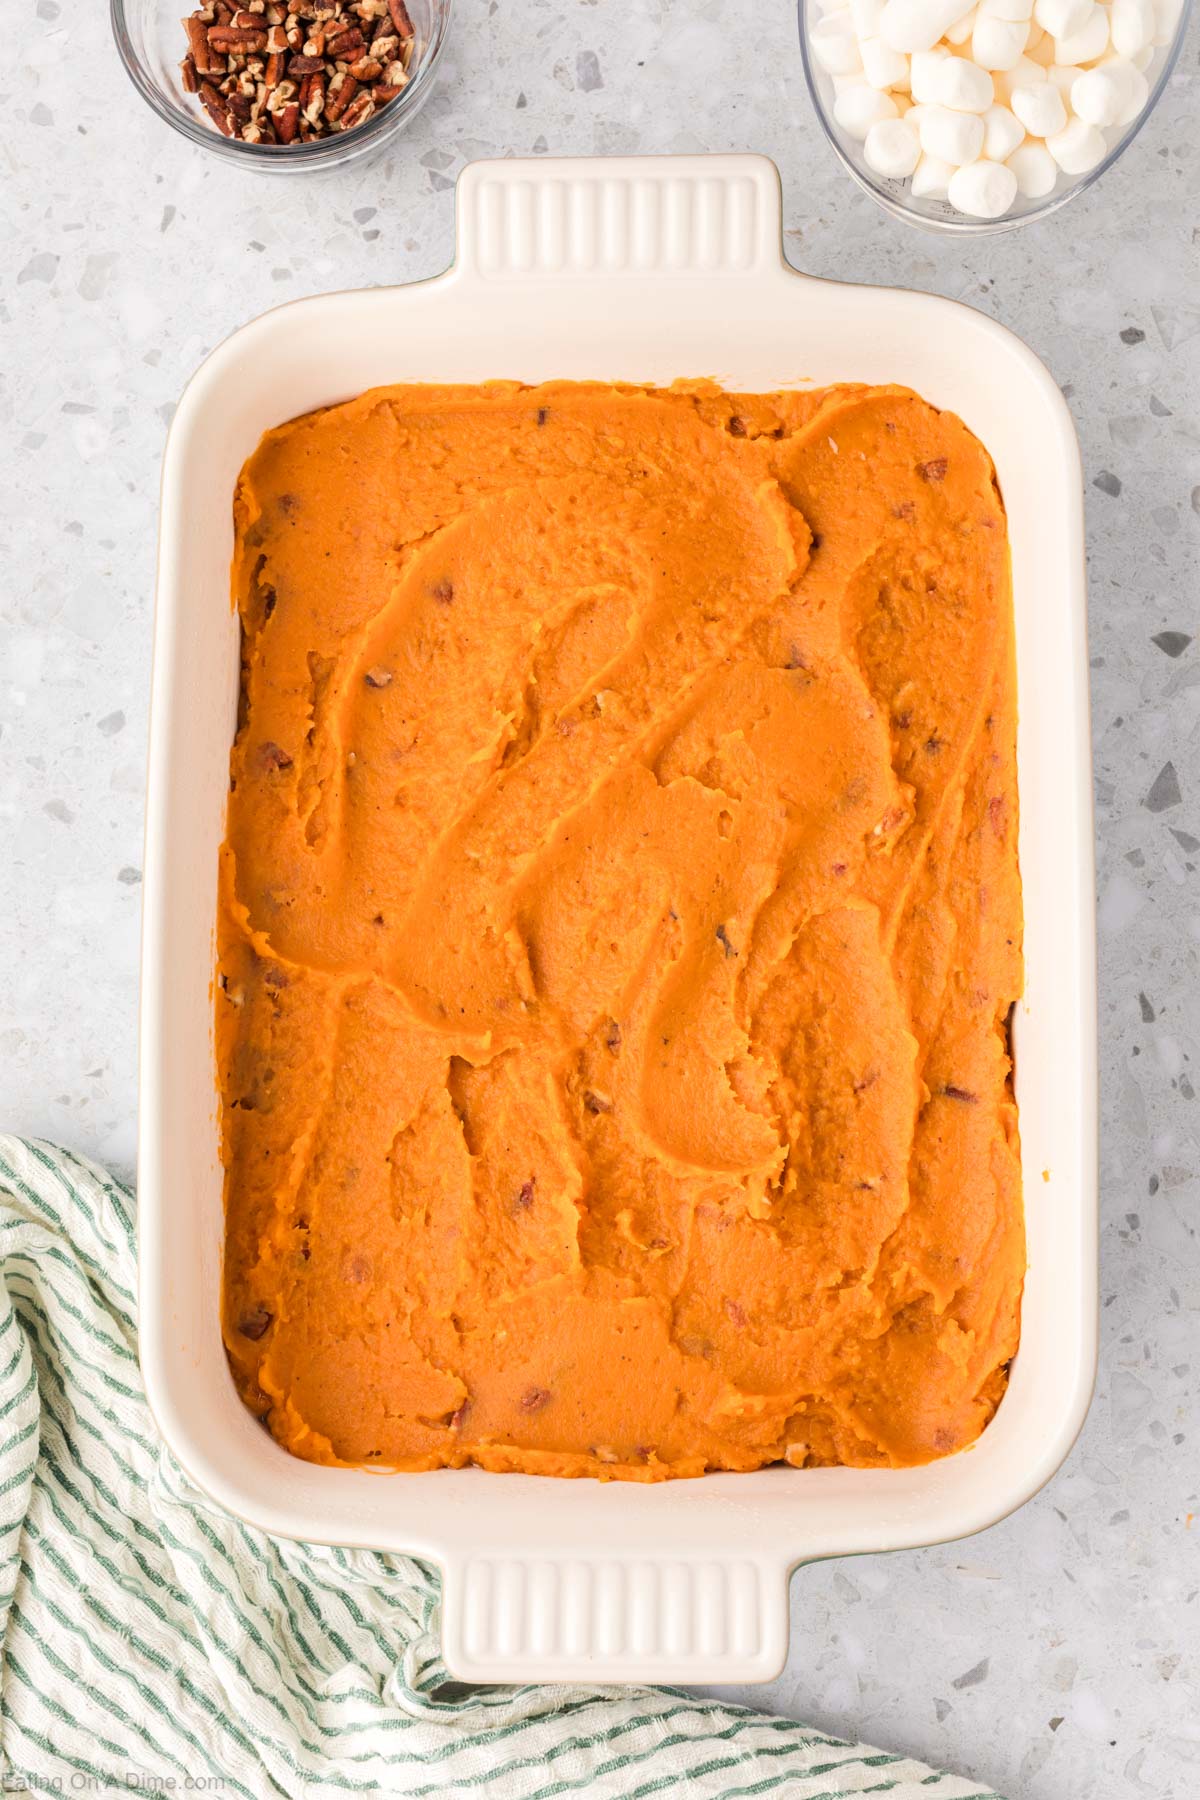 Spreading the sweet potatoes in a casserole dish